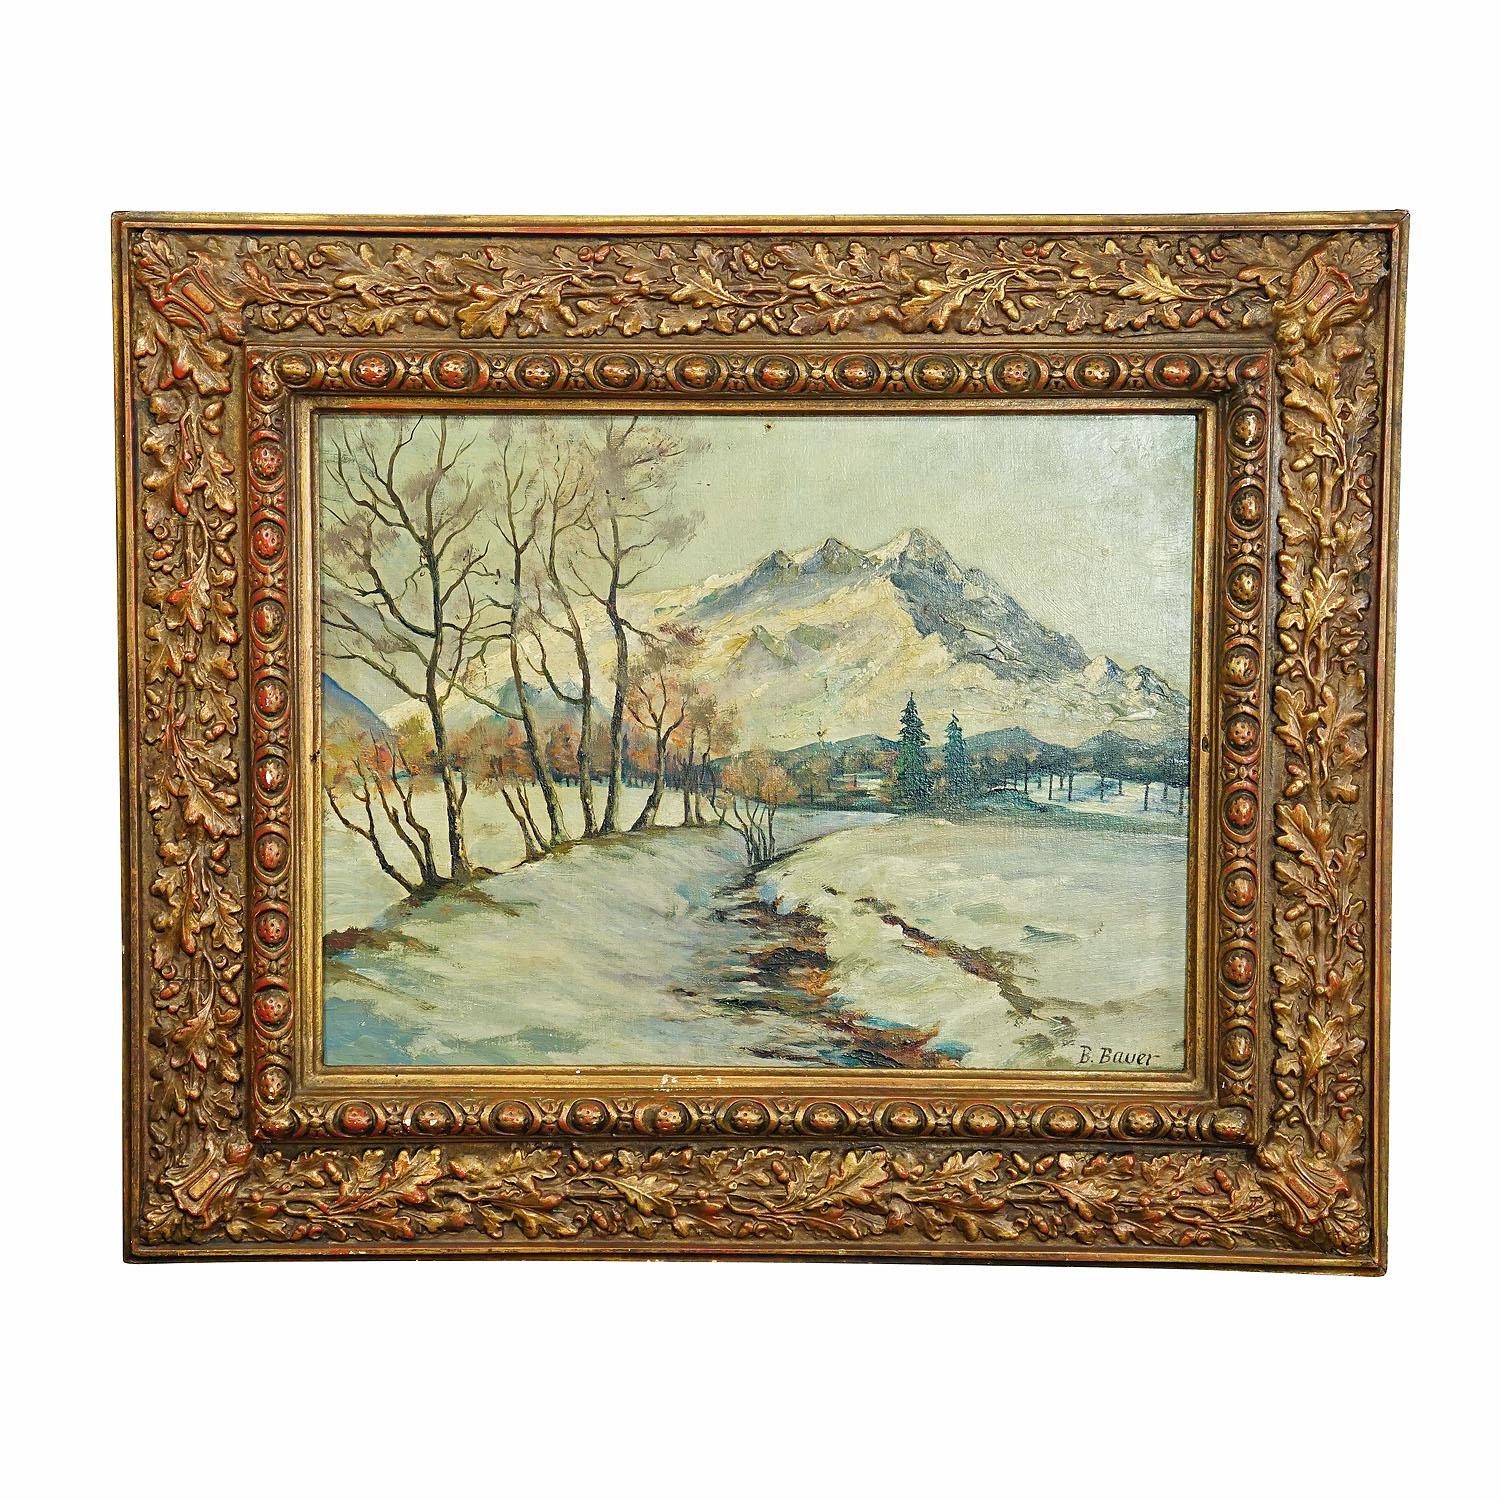 B. Bauer - oil painting alpine winter landscape, early 20th century.

A lovely antique oil painting depicting a winterly Alpine landscape. Oil on canvas 1st half of the 20th century. Framed with antique carved and gilded frame. Signed 